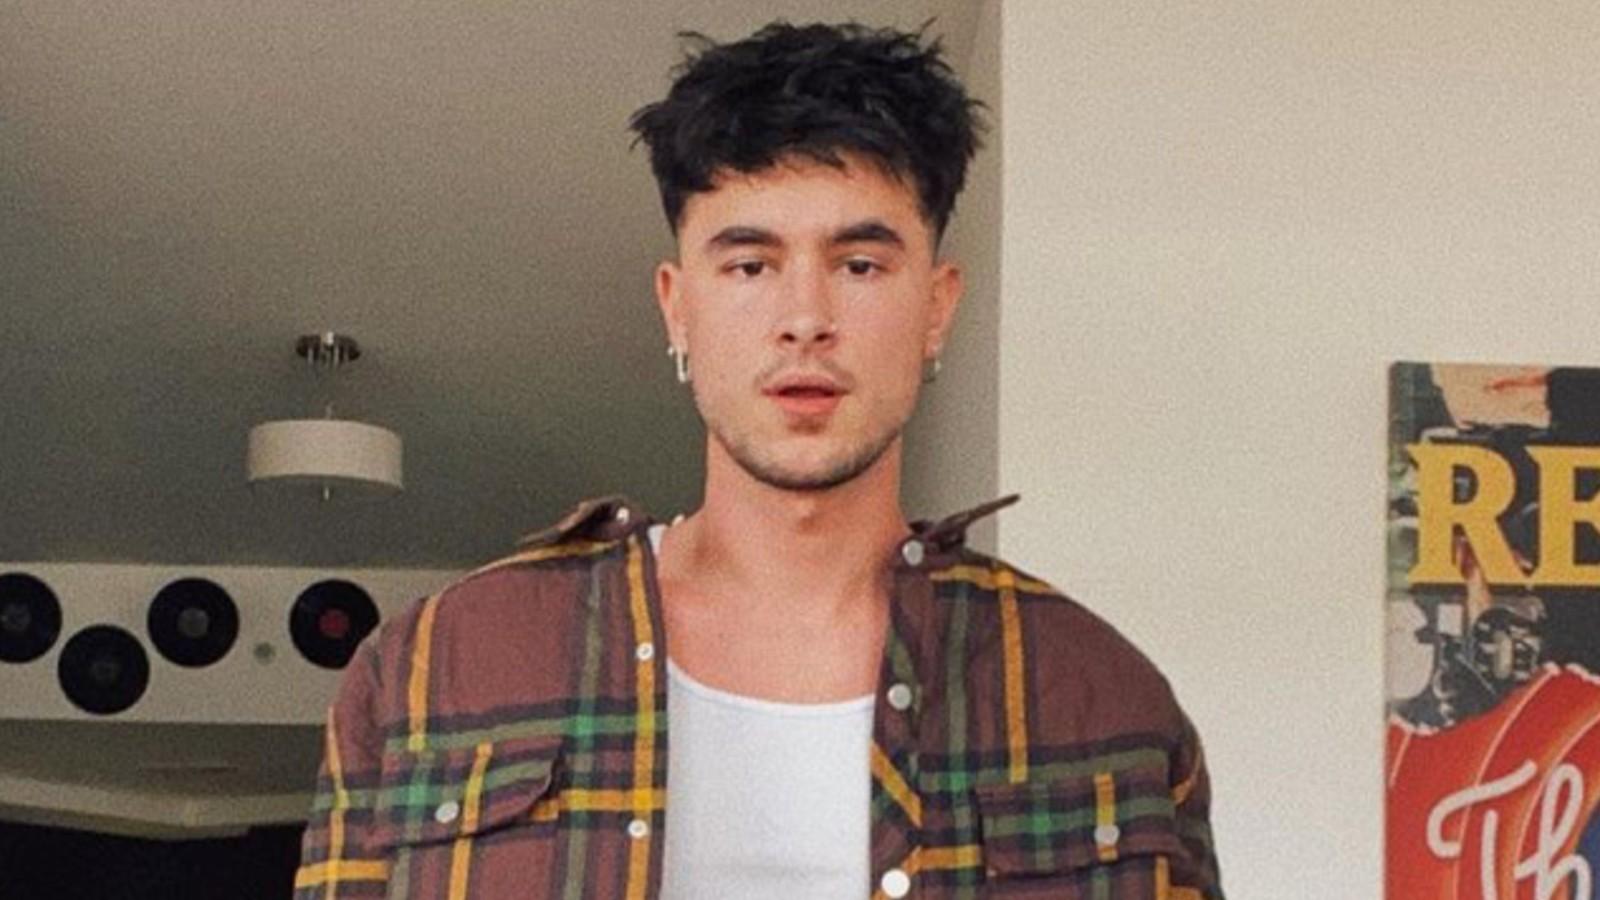 Kian Lawley poses in an Instagram picture